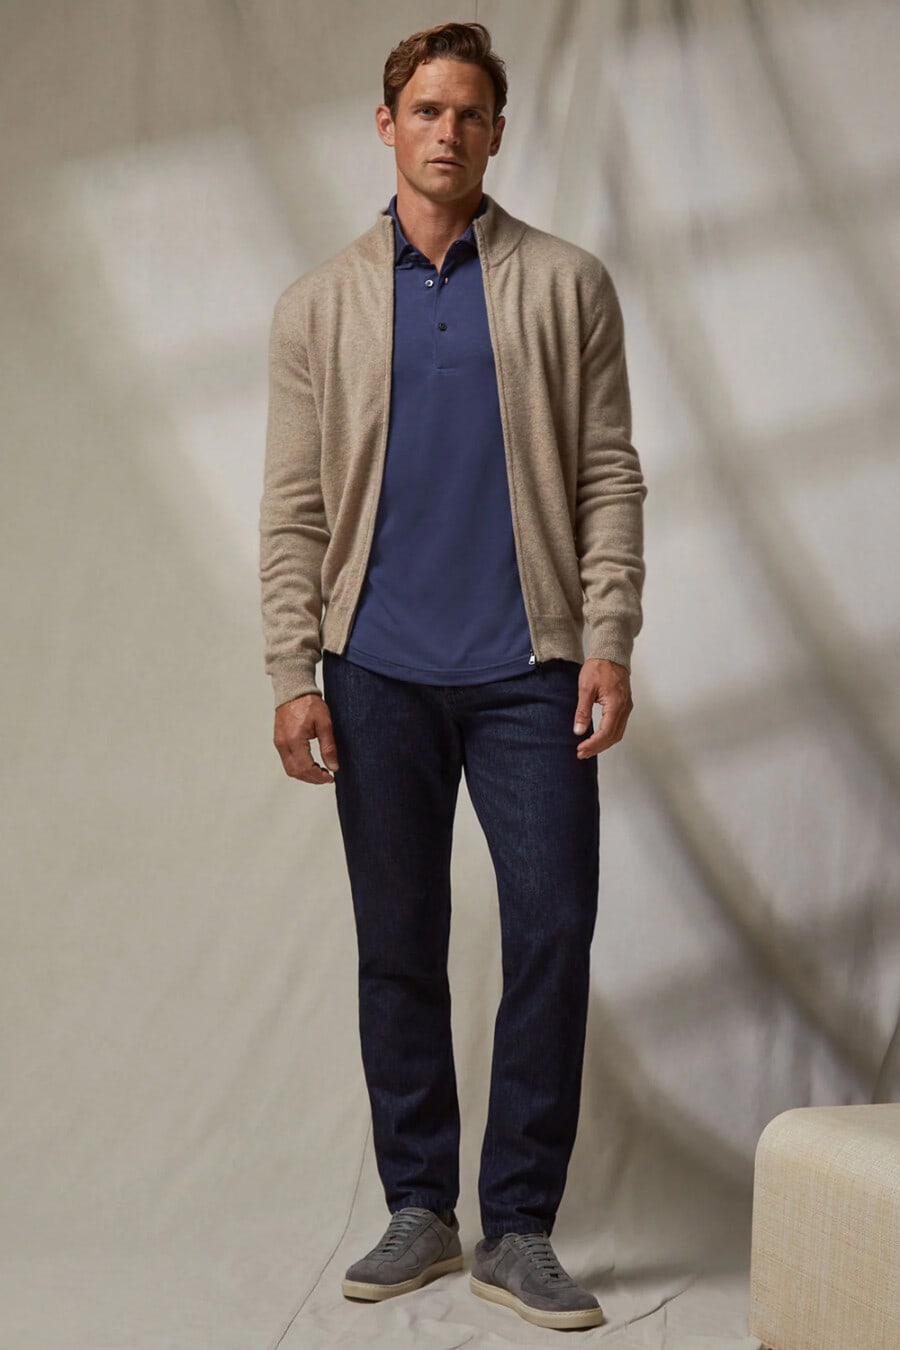 Men's dark jeans, blue polo shirt, biscuit merino zip-up cardigan and grey suede sneakers smart-casual outfit